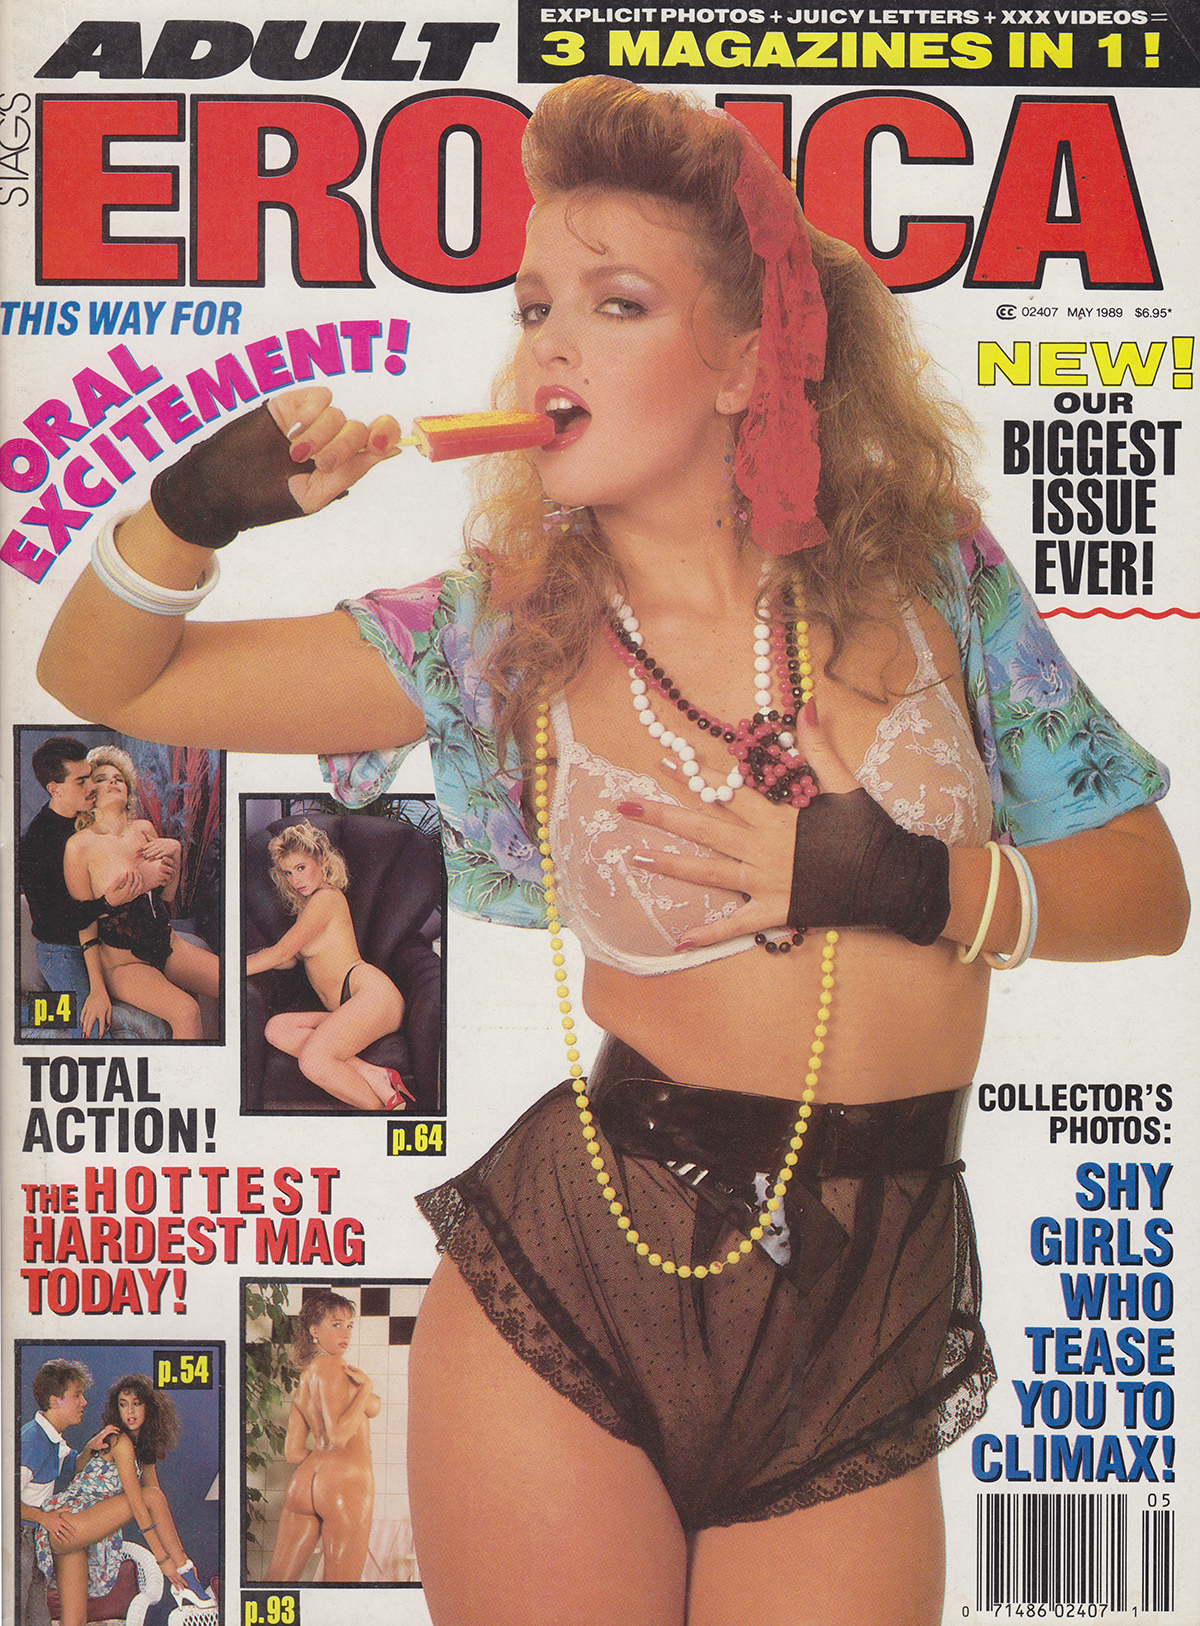 Stag May 1989 - Adult Erotica